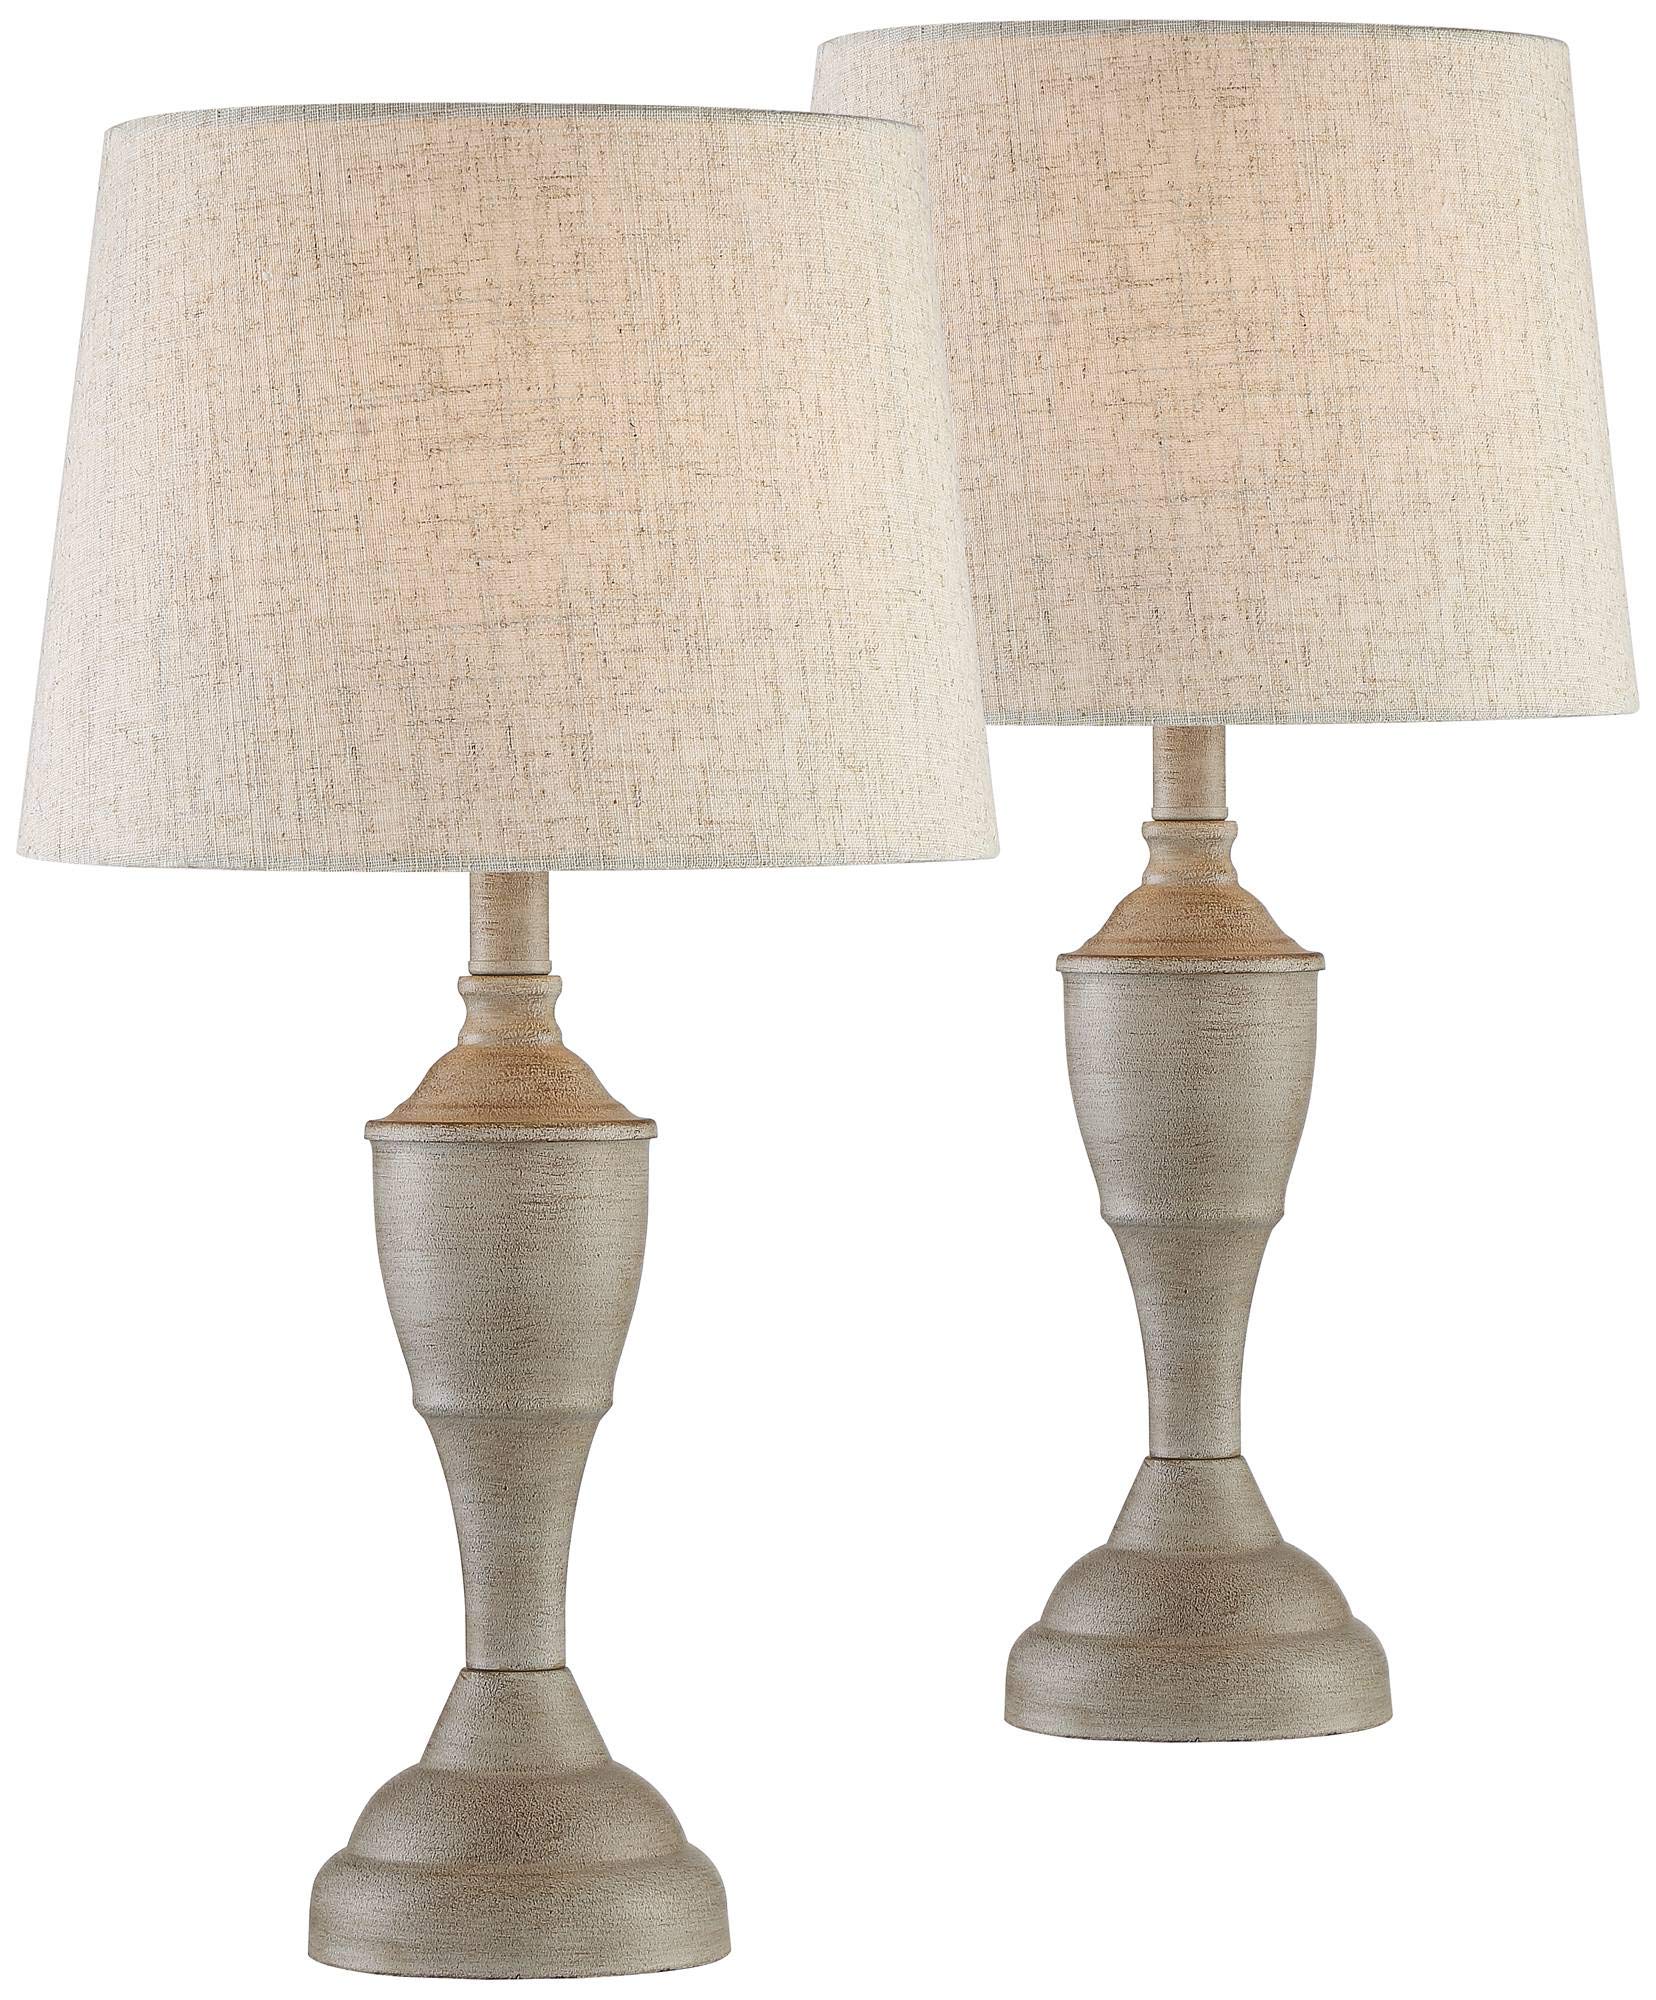 360 Lighting Claude Rustic Farmhouse Accent Table Lamps 21